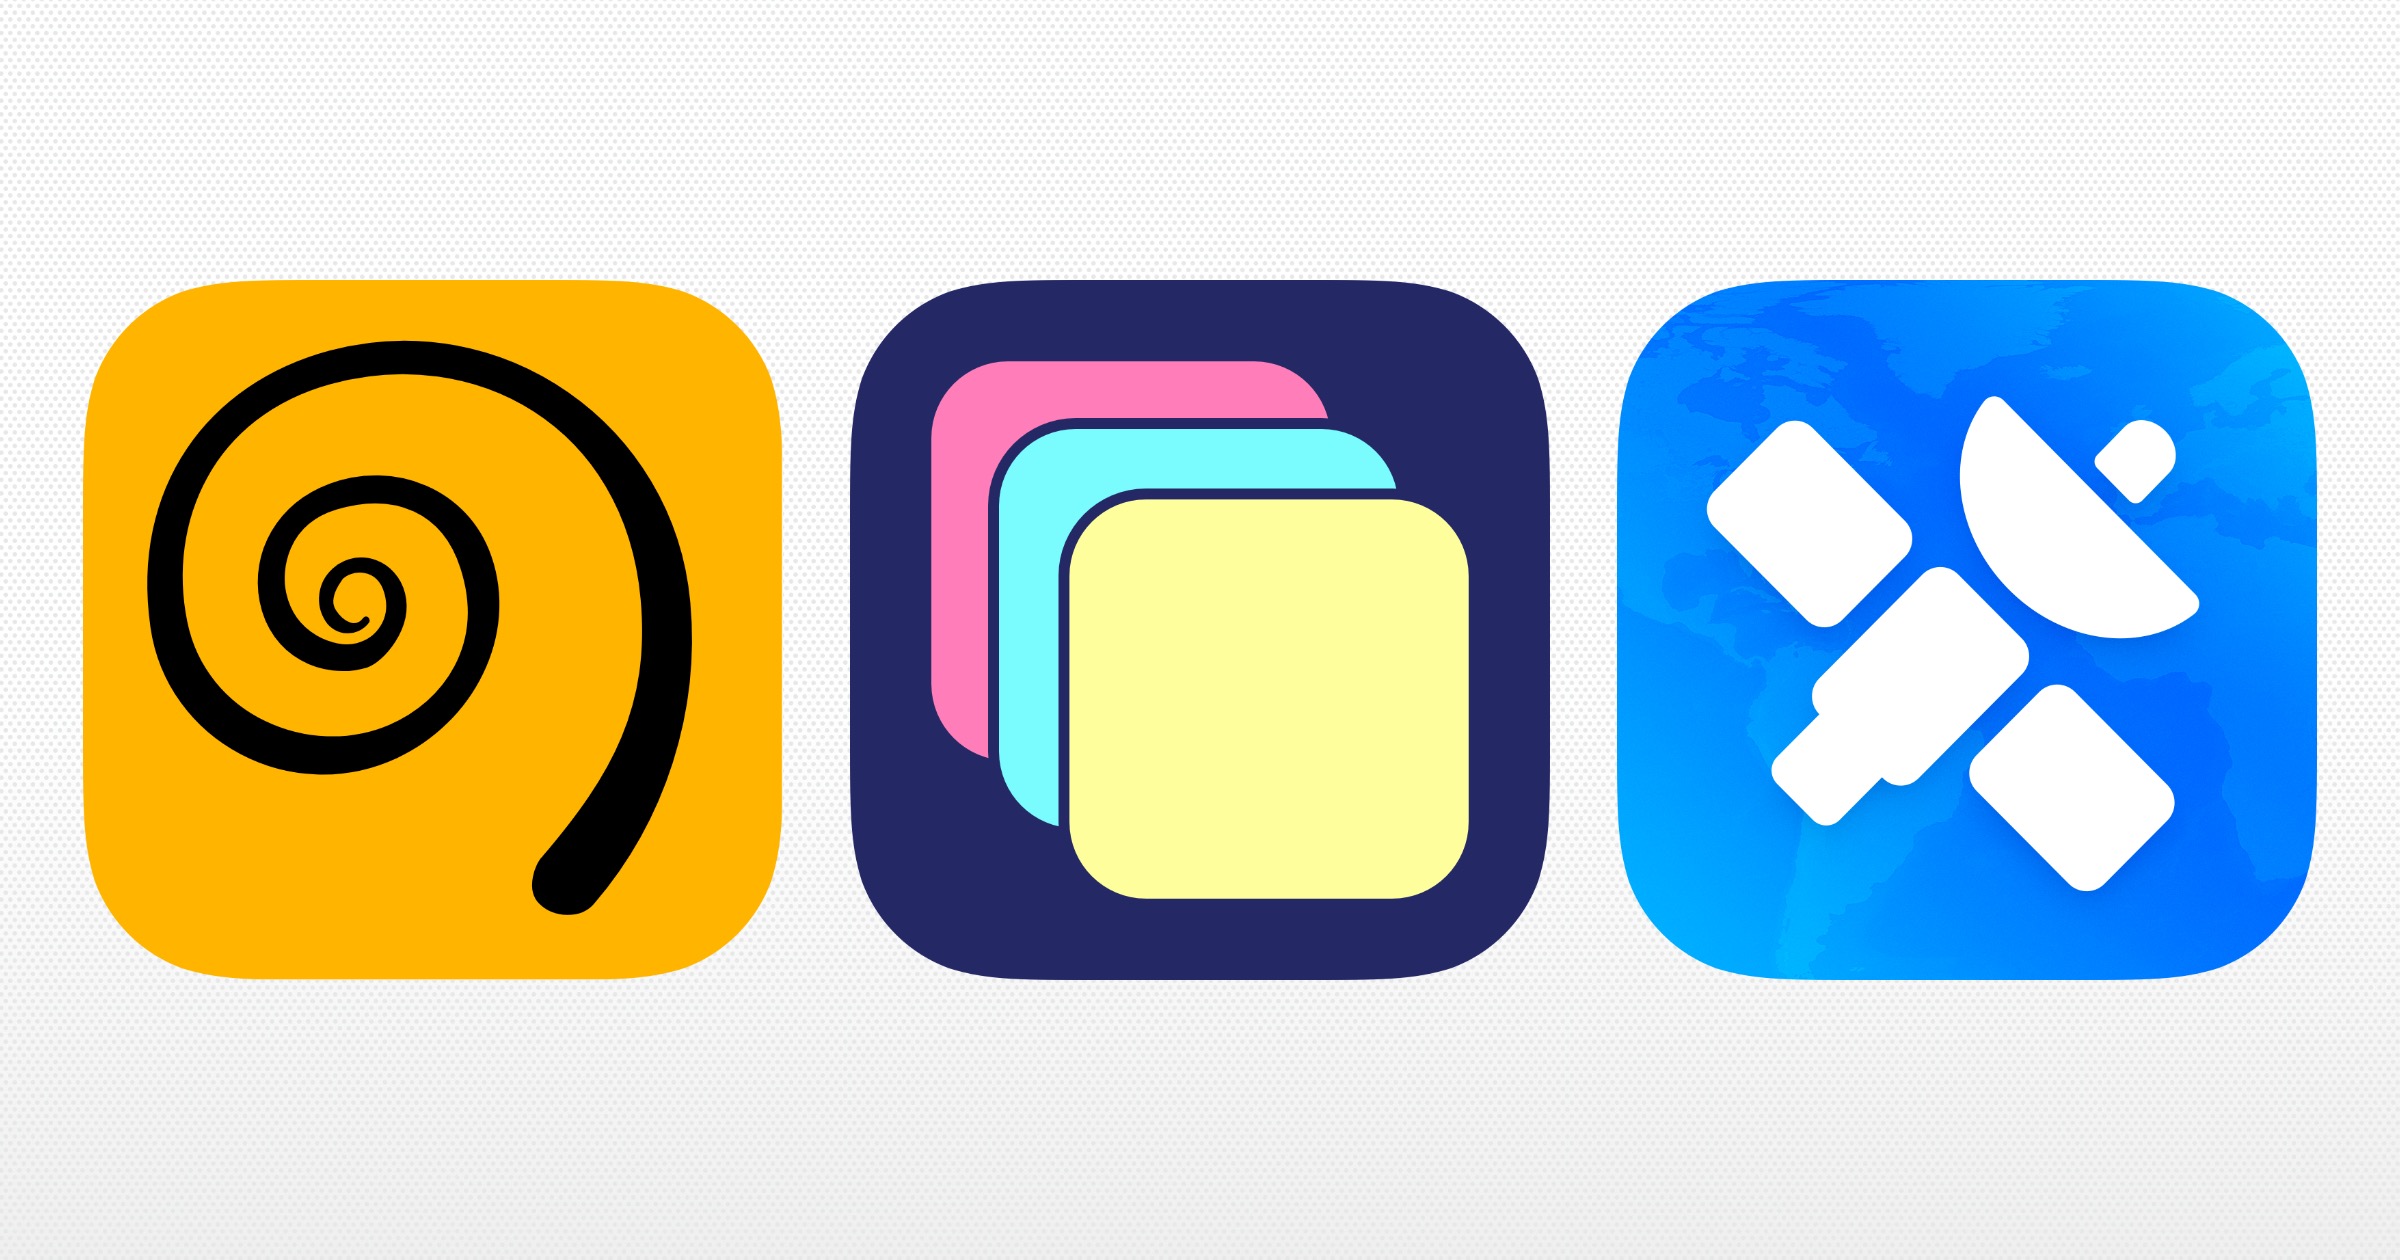 Icons of favorite 2020 apps